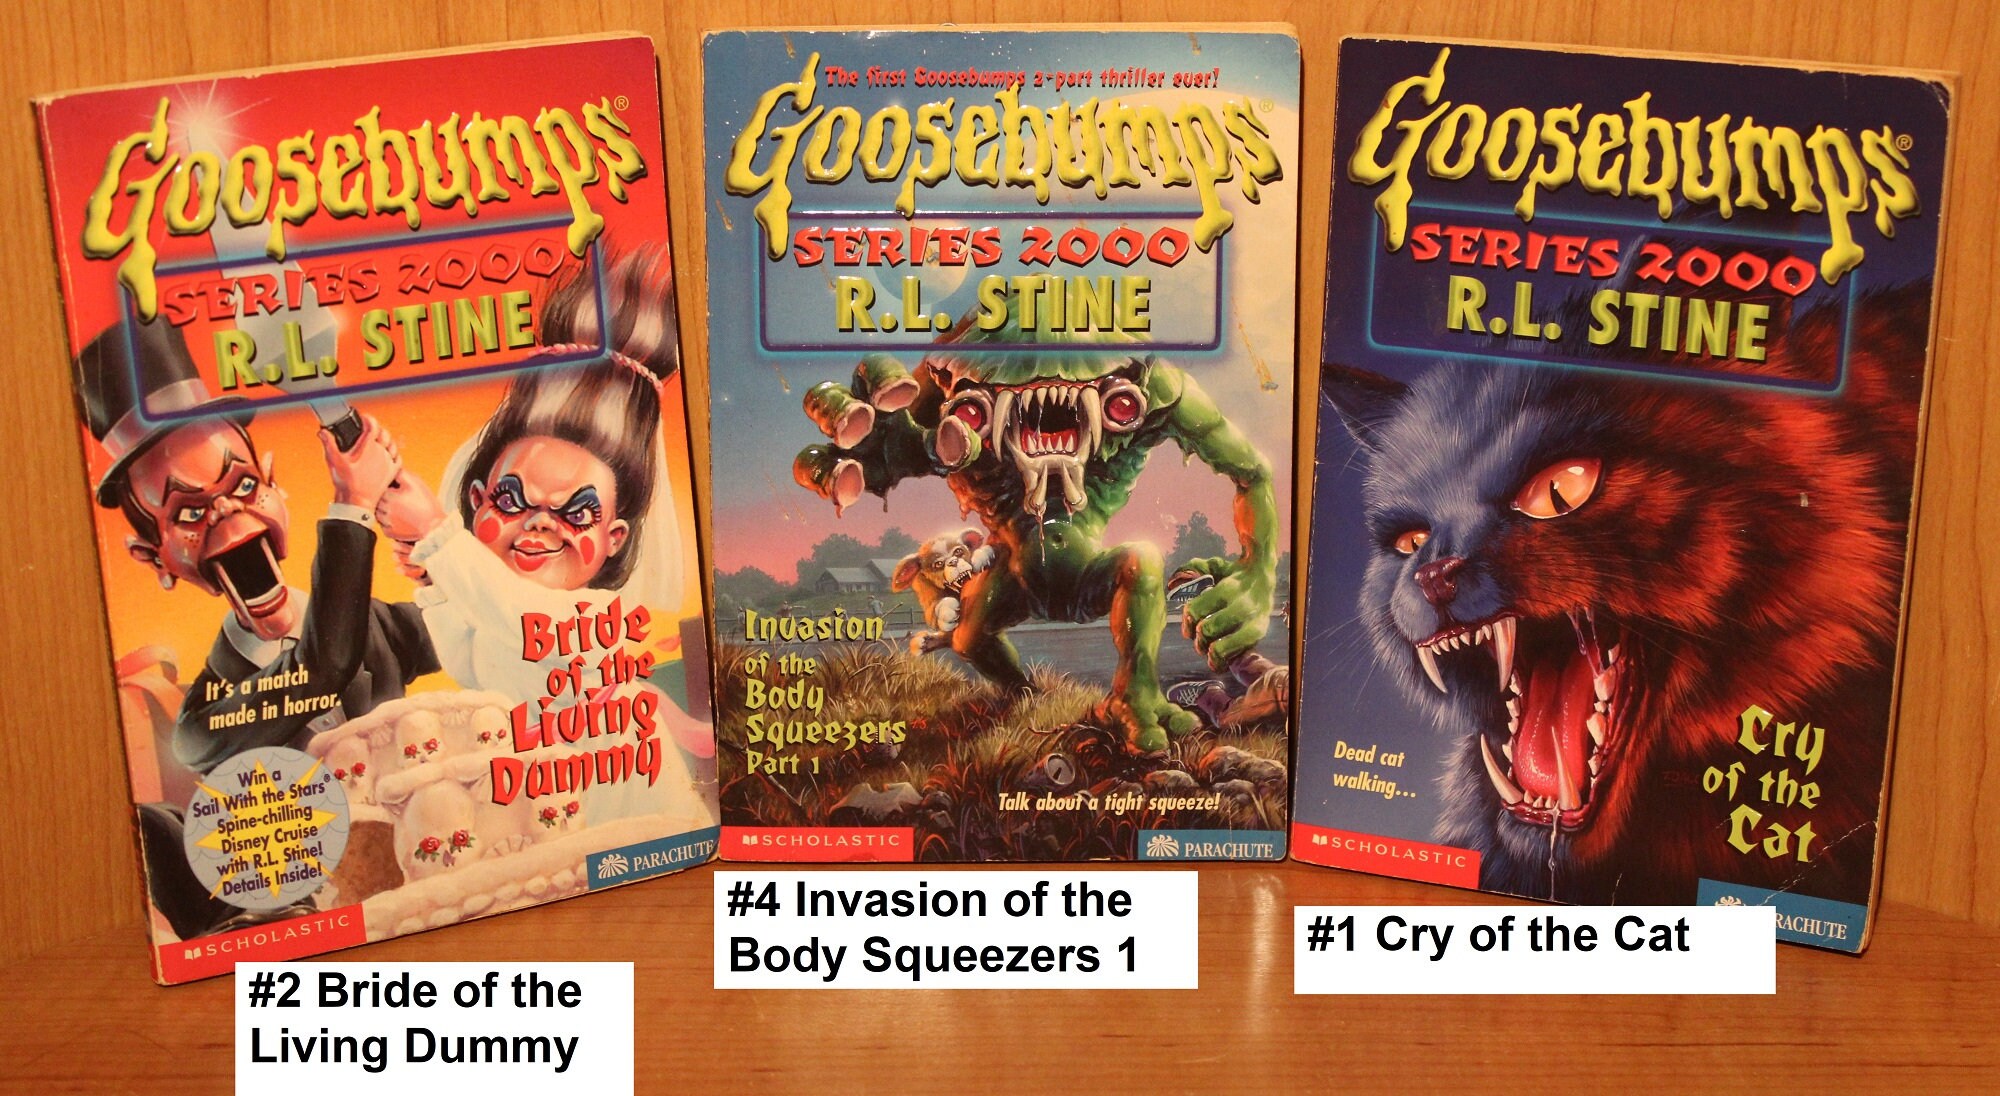 Scholastic, Sony to Produce New 'Goosebumps' TV Series - The Toy Book